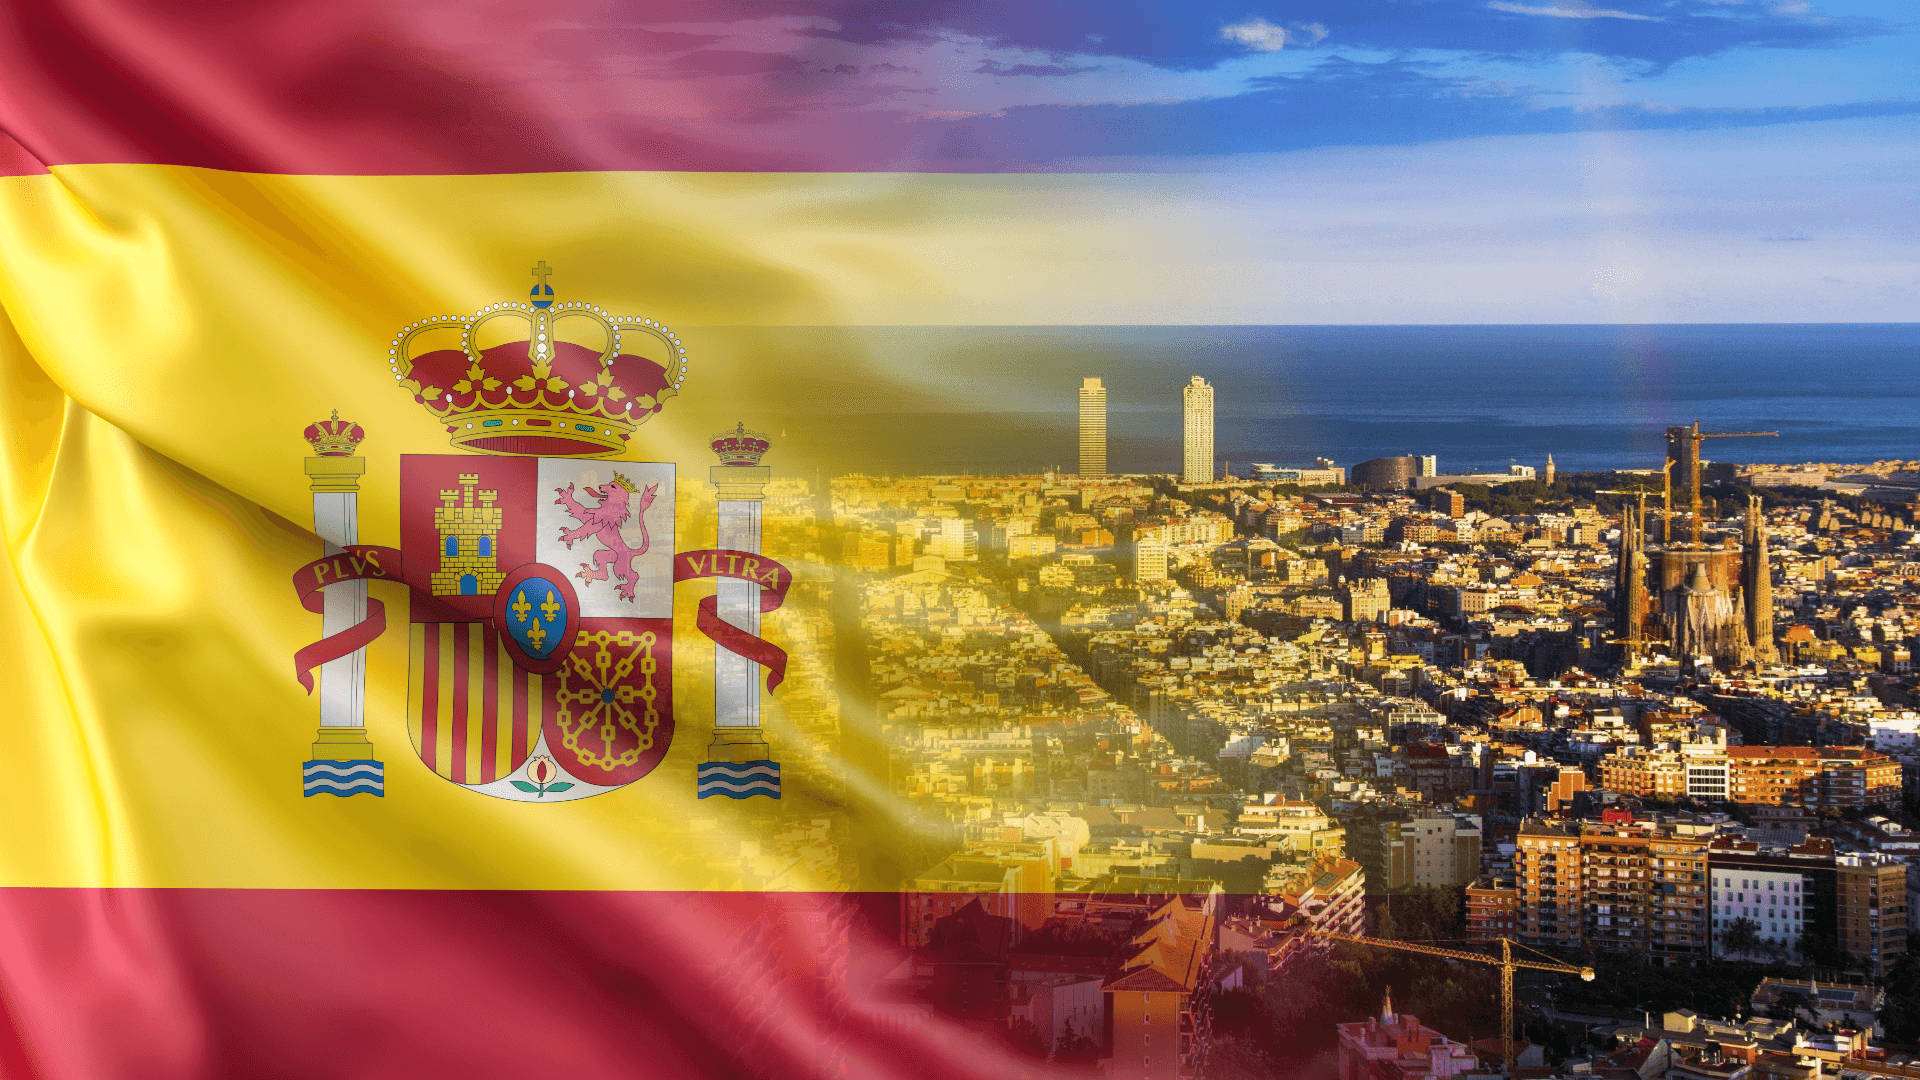 best mba colleges in spain